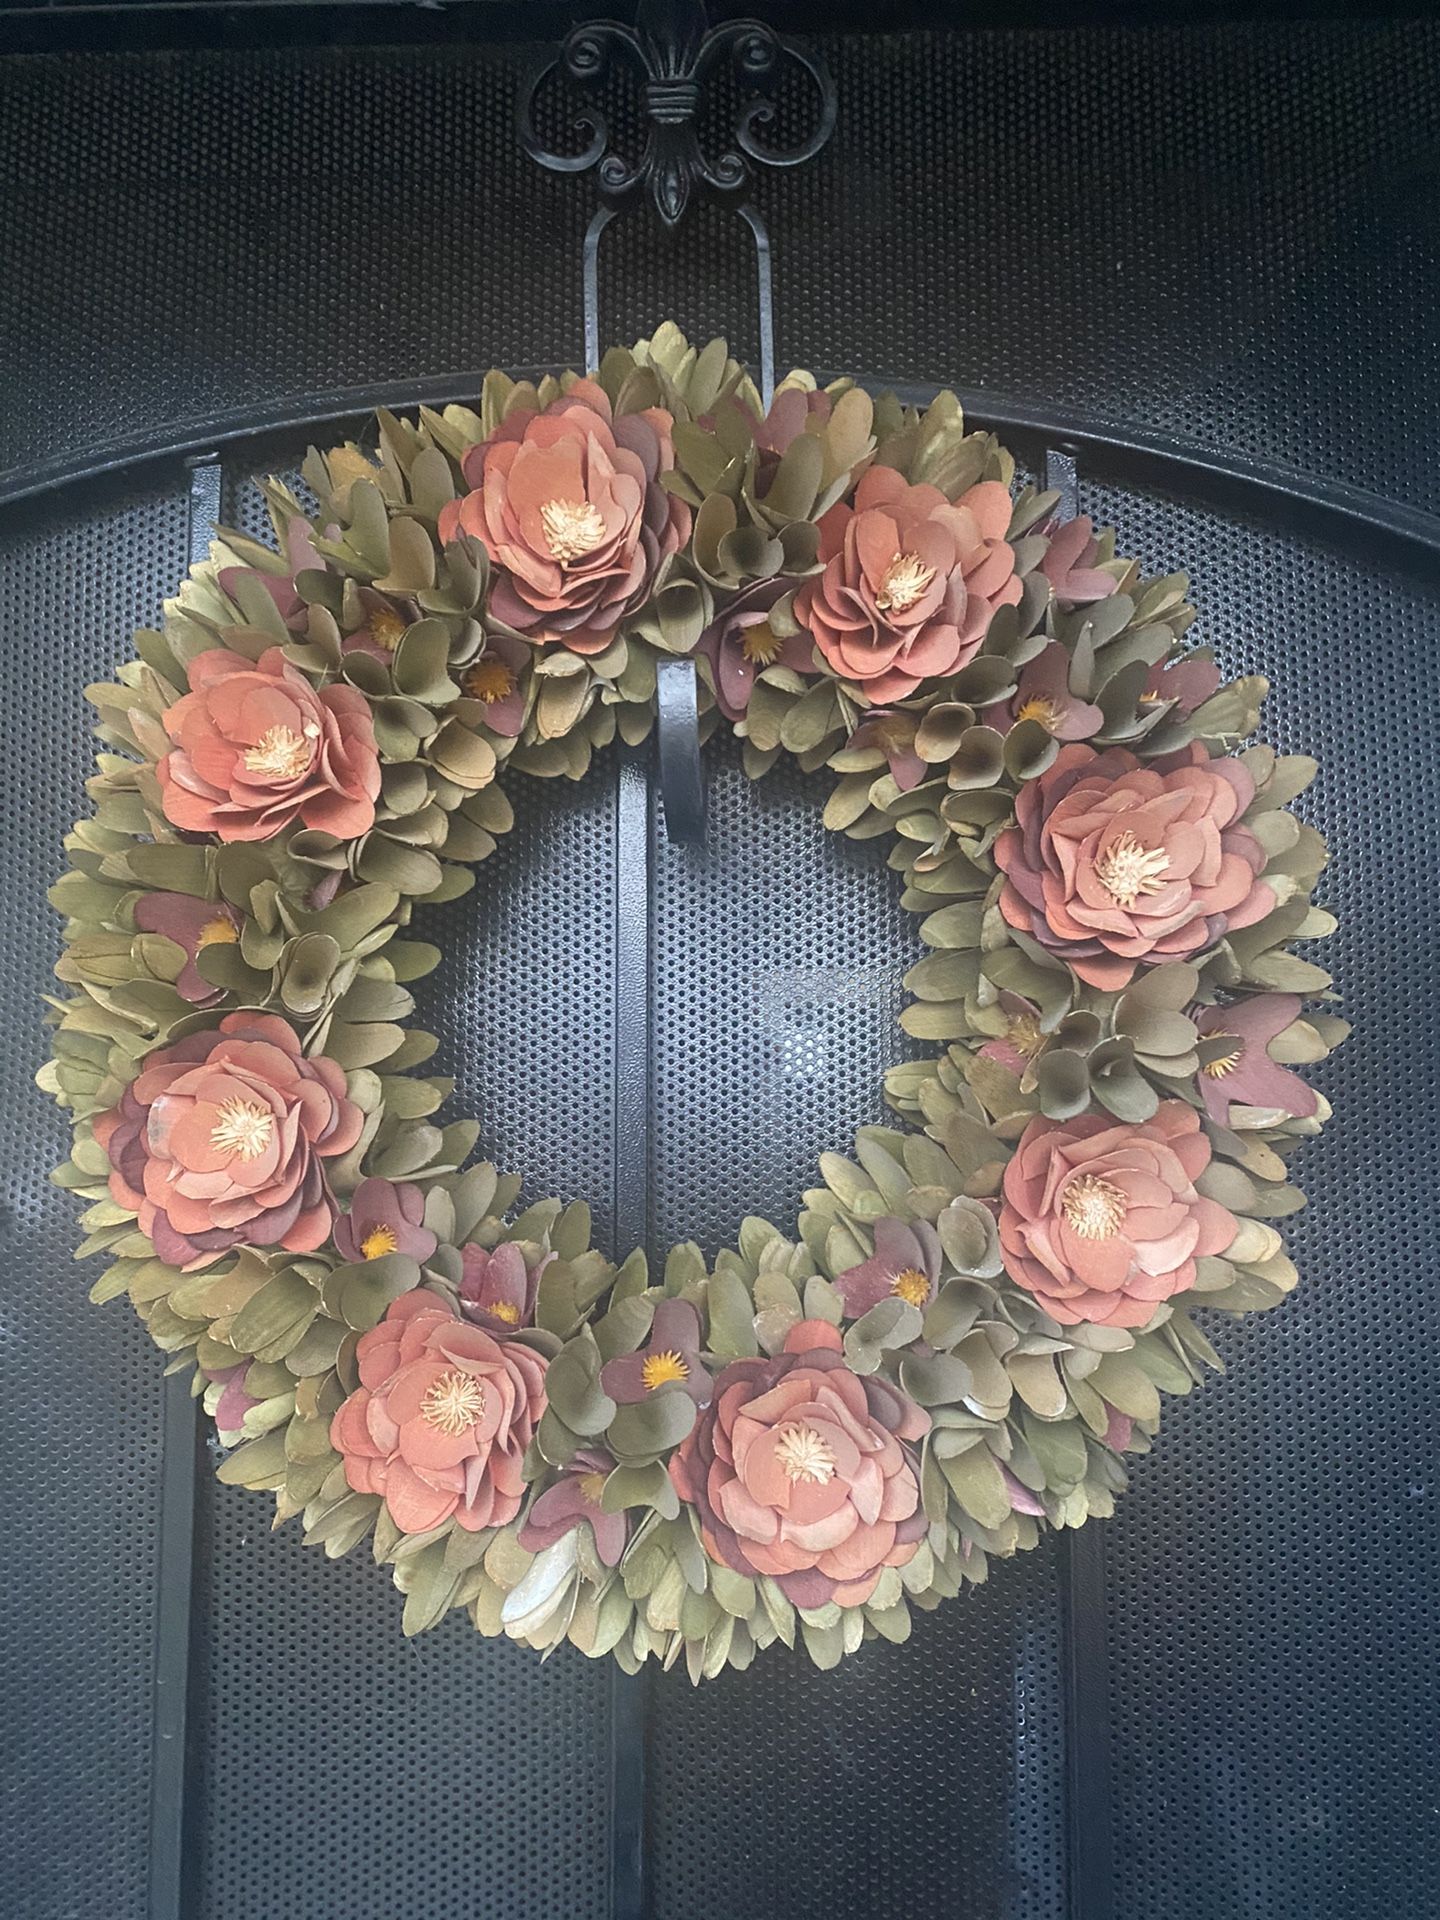 Wreath and container